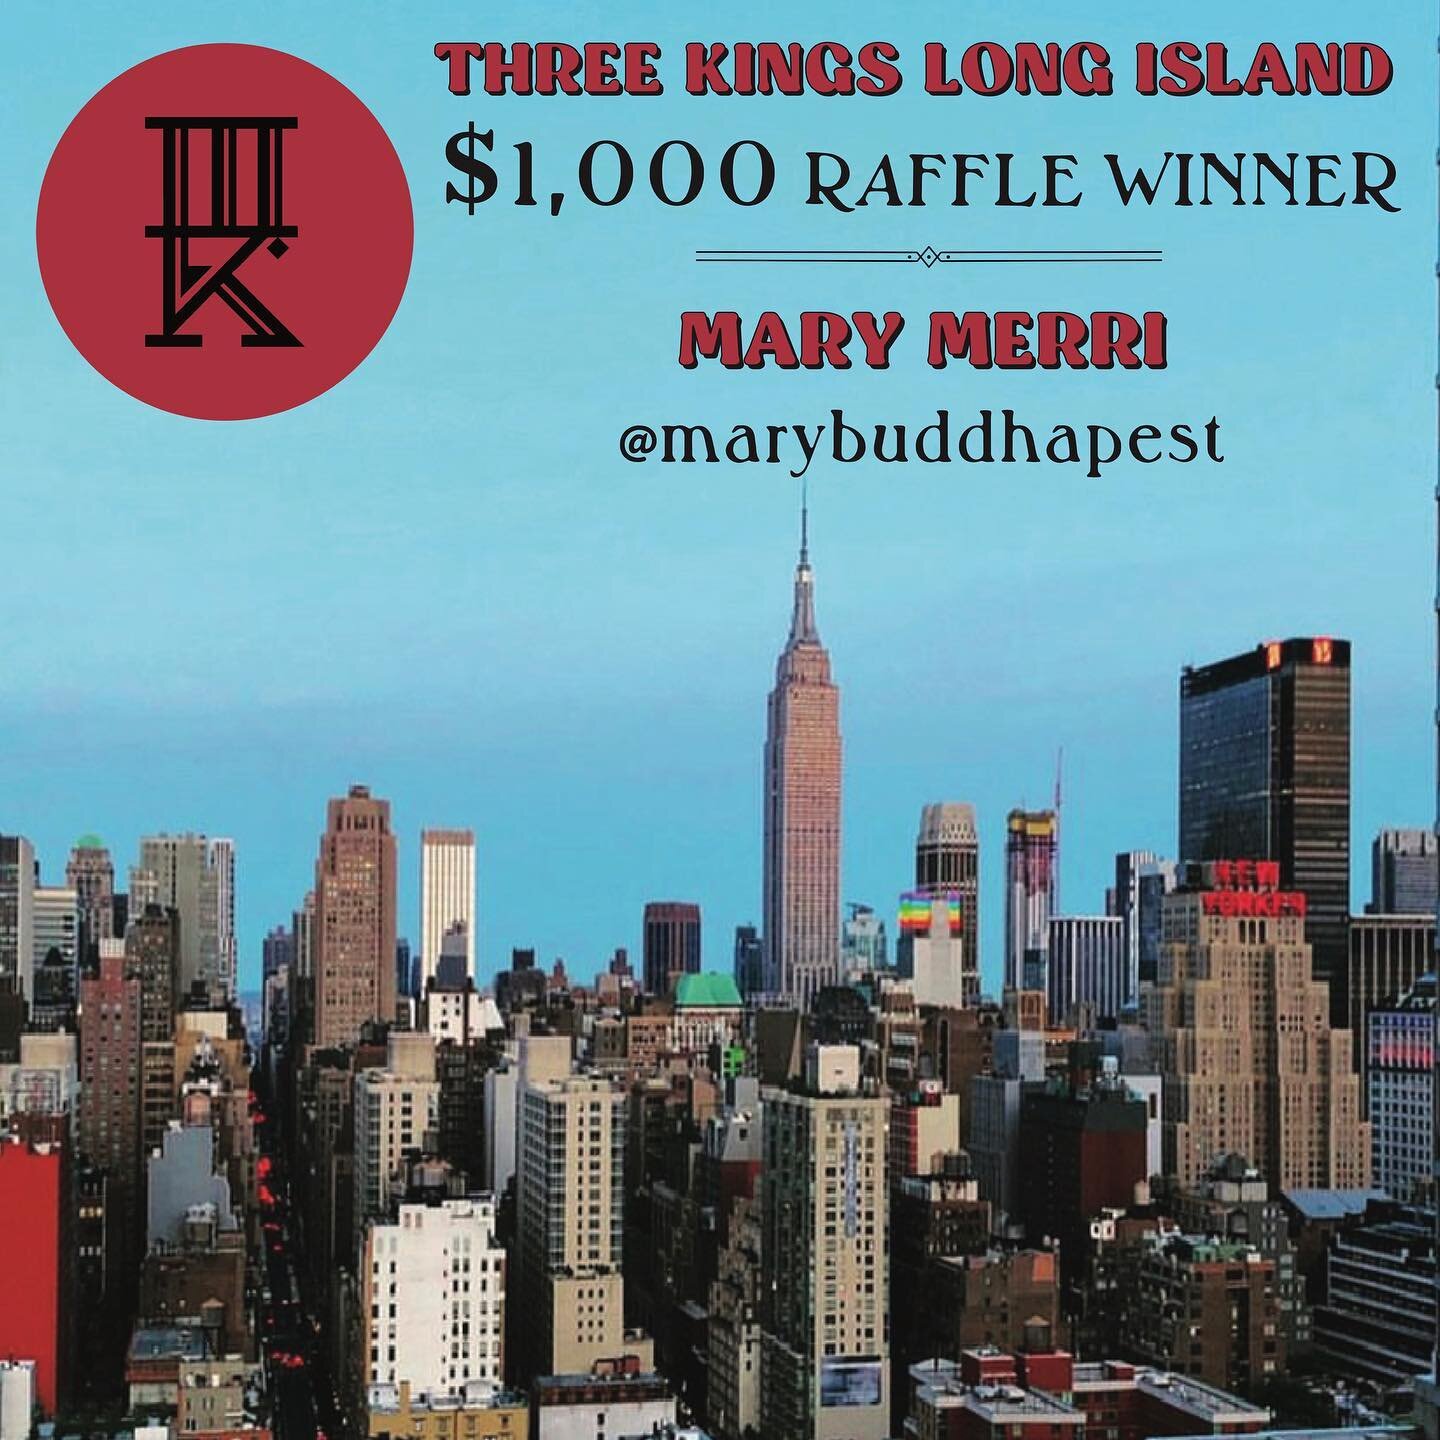 Happy New Year everyone! We are excited to announce the winner for @threekingsli is @marybuddhapest!!! Thank you so much to everyone who stepped through our doors and got tattooed this year! We look forward to seeing you in 2024!!!
.
.
.
#threekingst